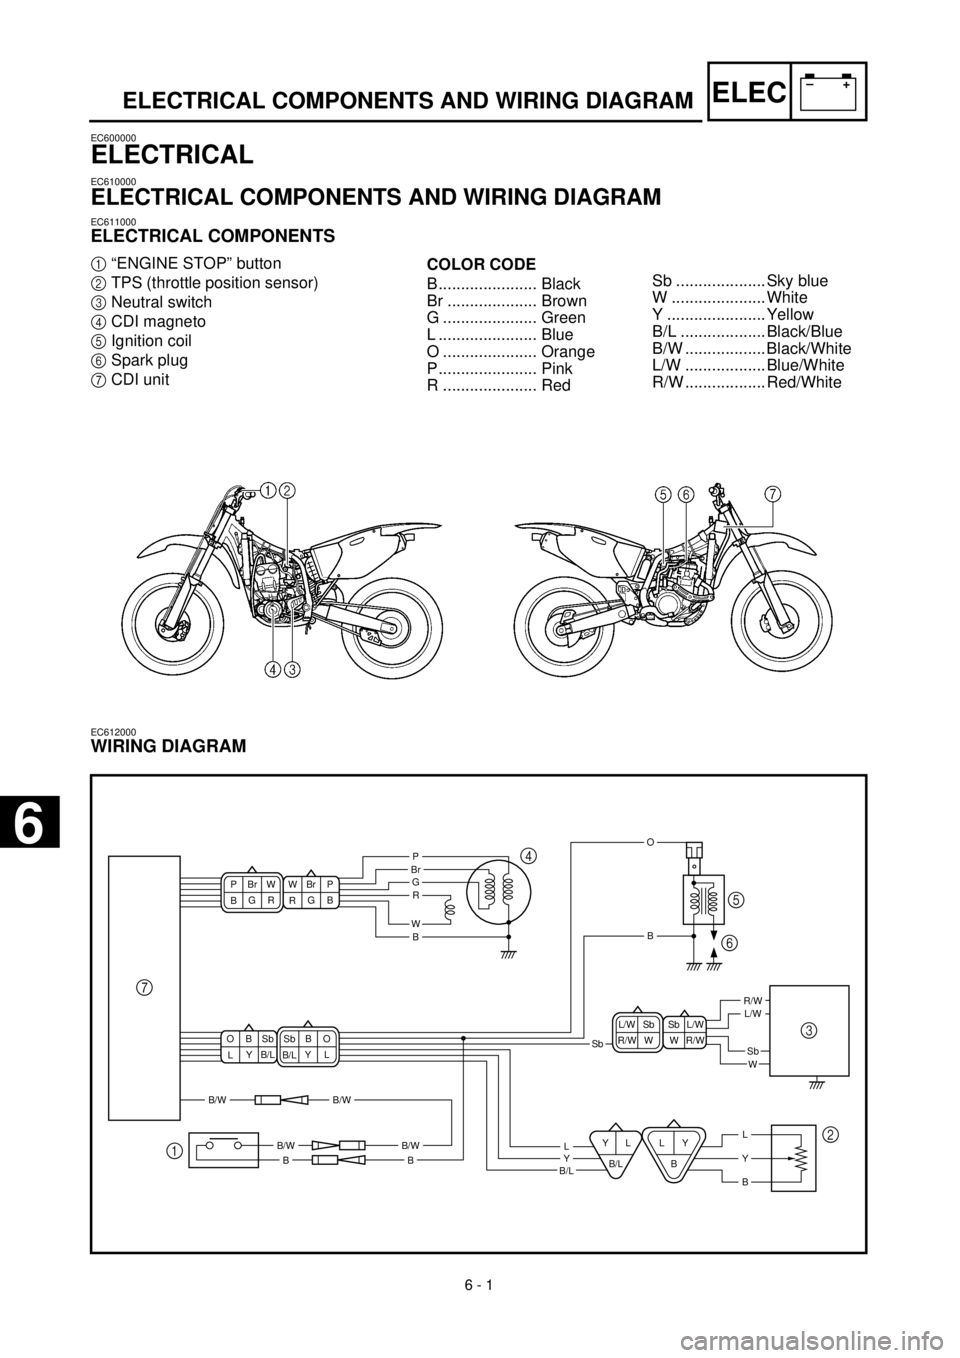 YAMAHA YZ426F 2001  Betriebsanleitungen (in German) 6 - 1
–+ELECELECTRICAL COMPONENTS AND WIRING DIAGRAM
EC600000
ELECTRICAL
EC610000
ELECTRICAL COMPONENTS AND WIRING DIAGRAM
EC611000
ELECTRICAL COMPONENTS
1“ENGINE STOP” button
2TPS (throttle pos